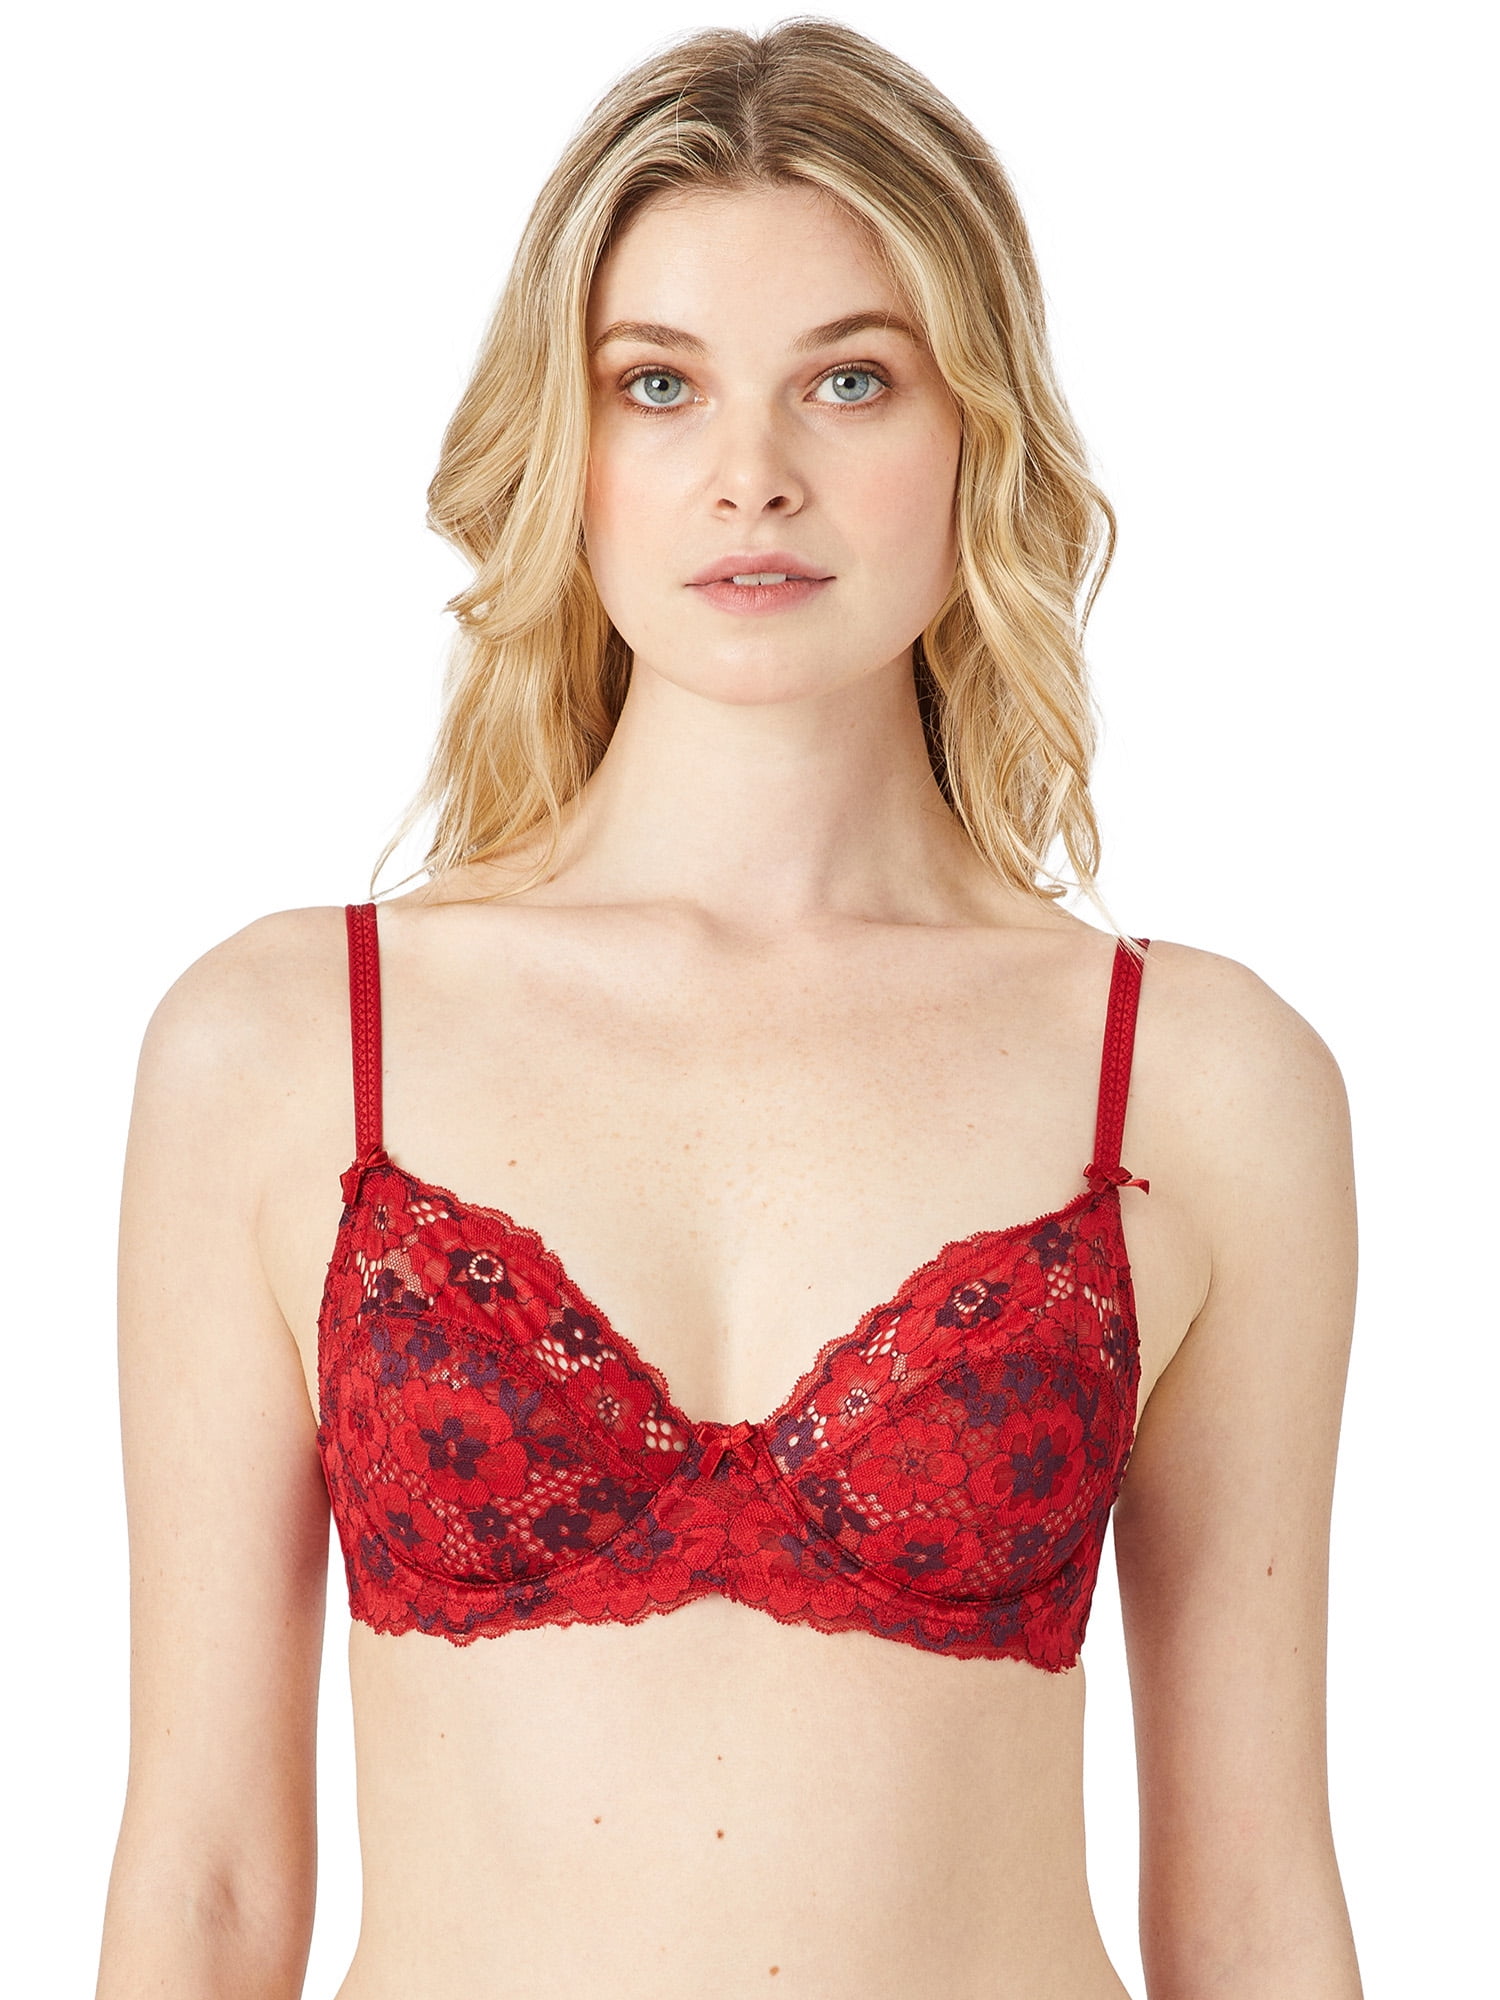 Adored by Adore Me Women’s Chelsey Floral Lace Unlined Underwire Bra